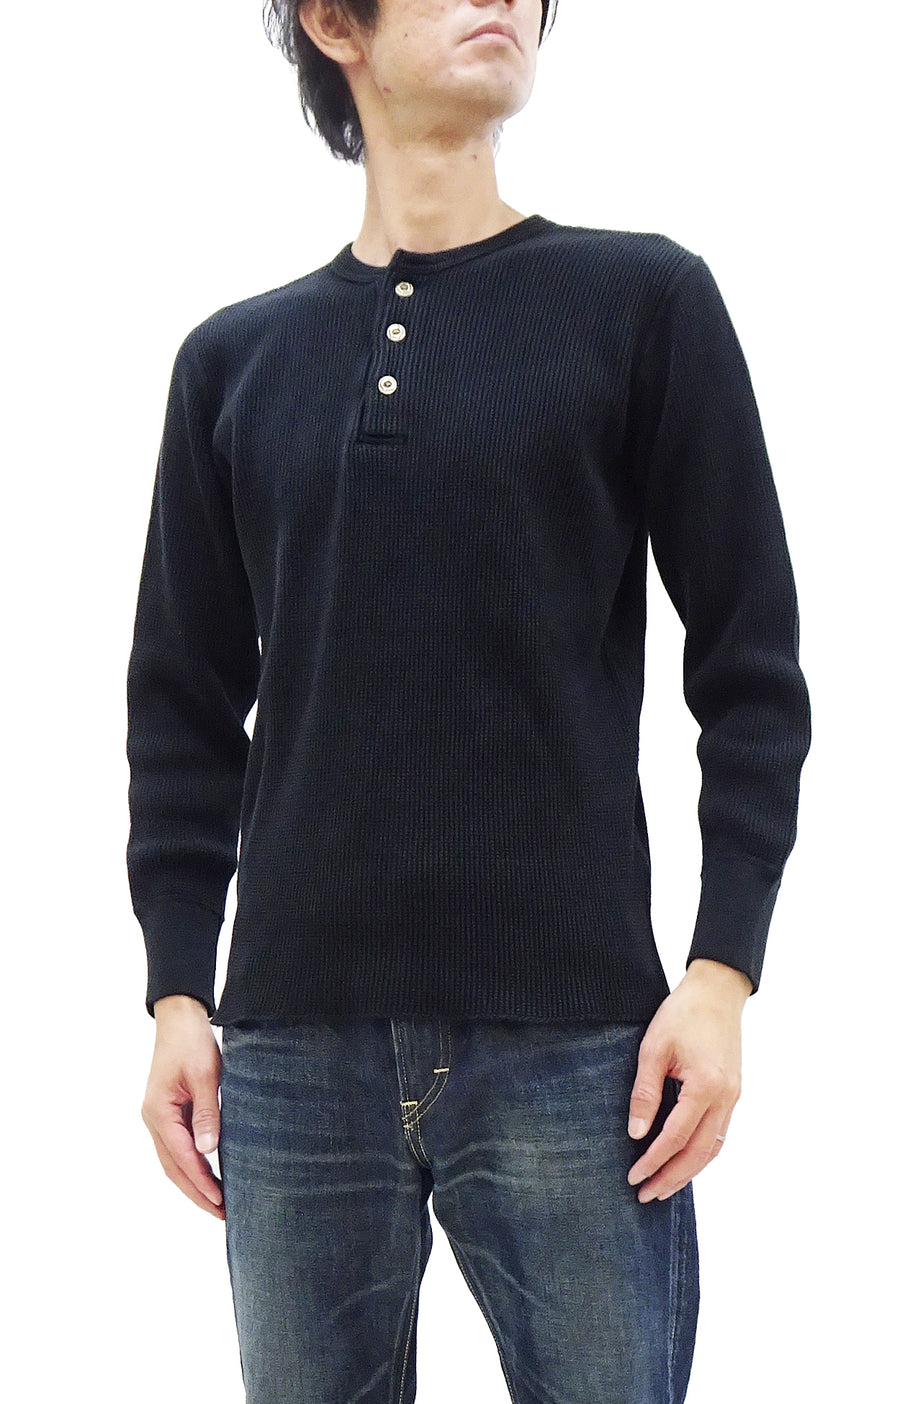 Men's Classic Waffle Knit Heavyweight Cotton Long Sleeve Thermal T